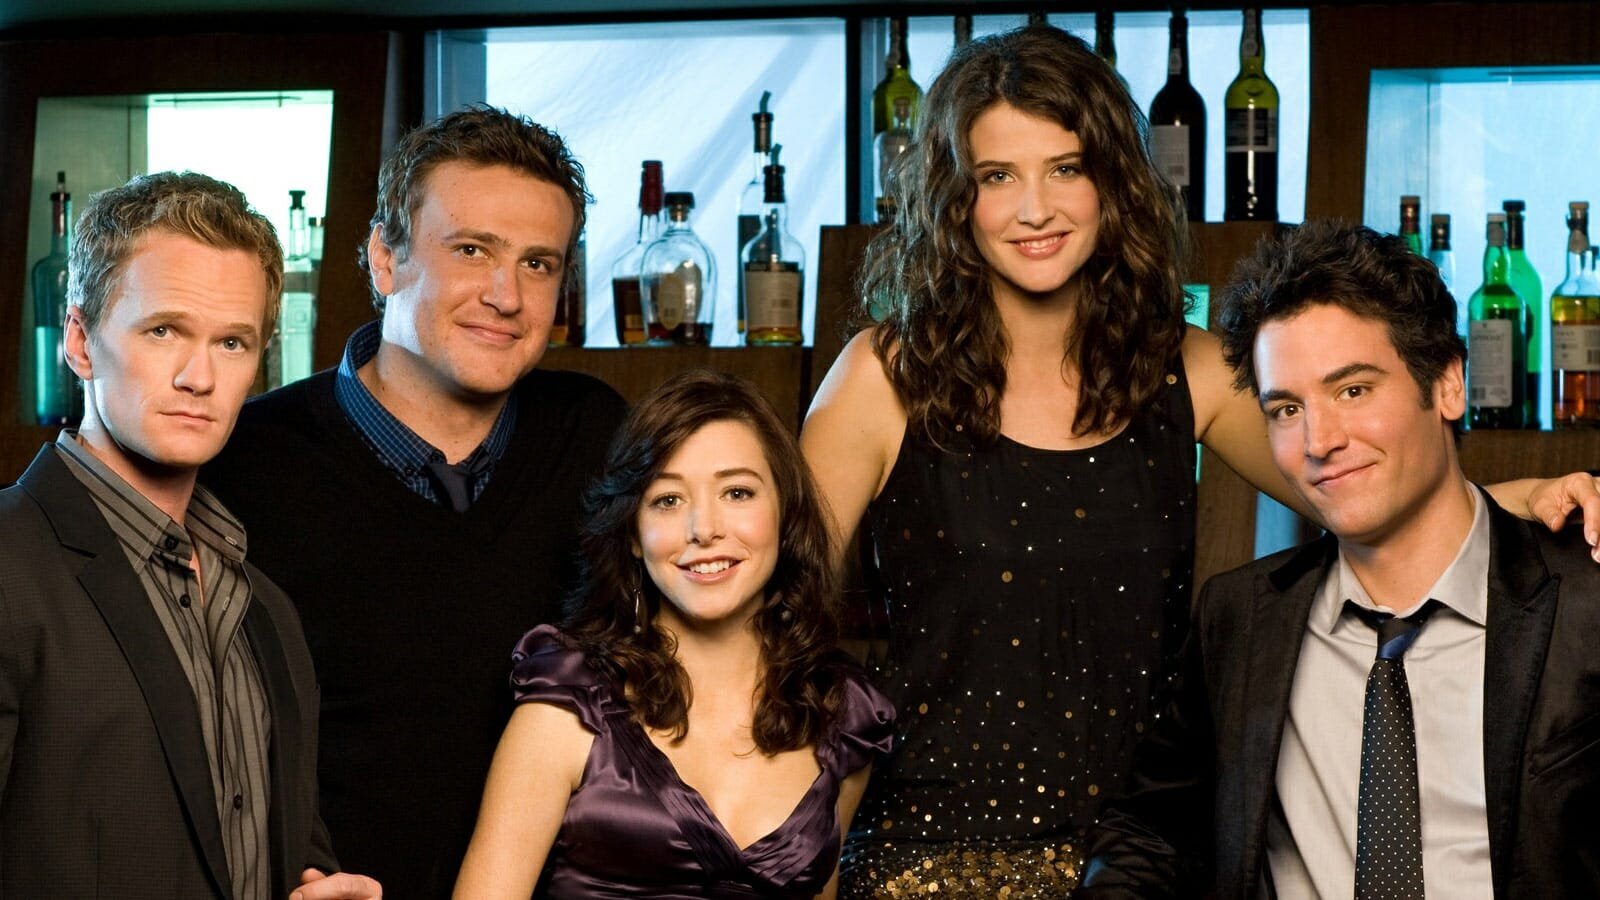 Sitcoms on amazon prime: How I Met Your Mother